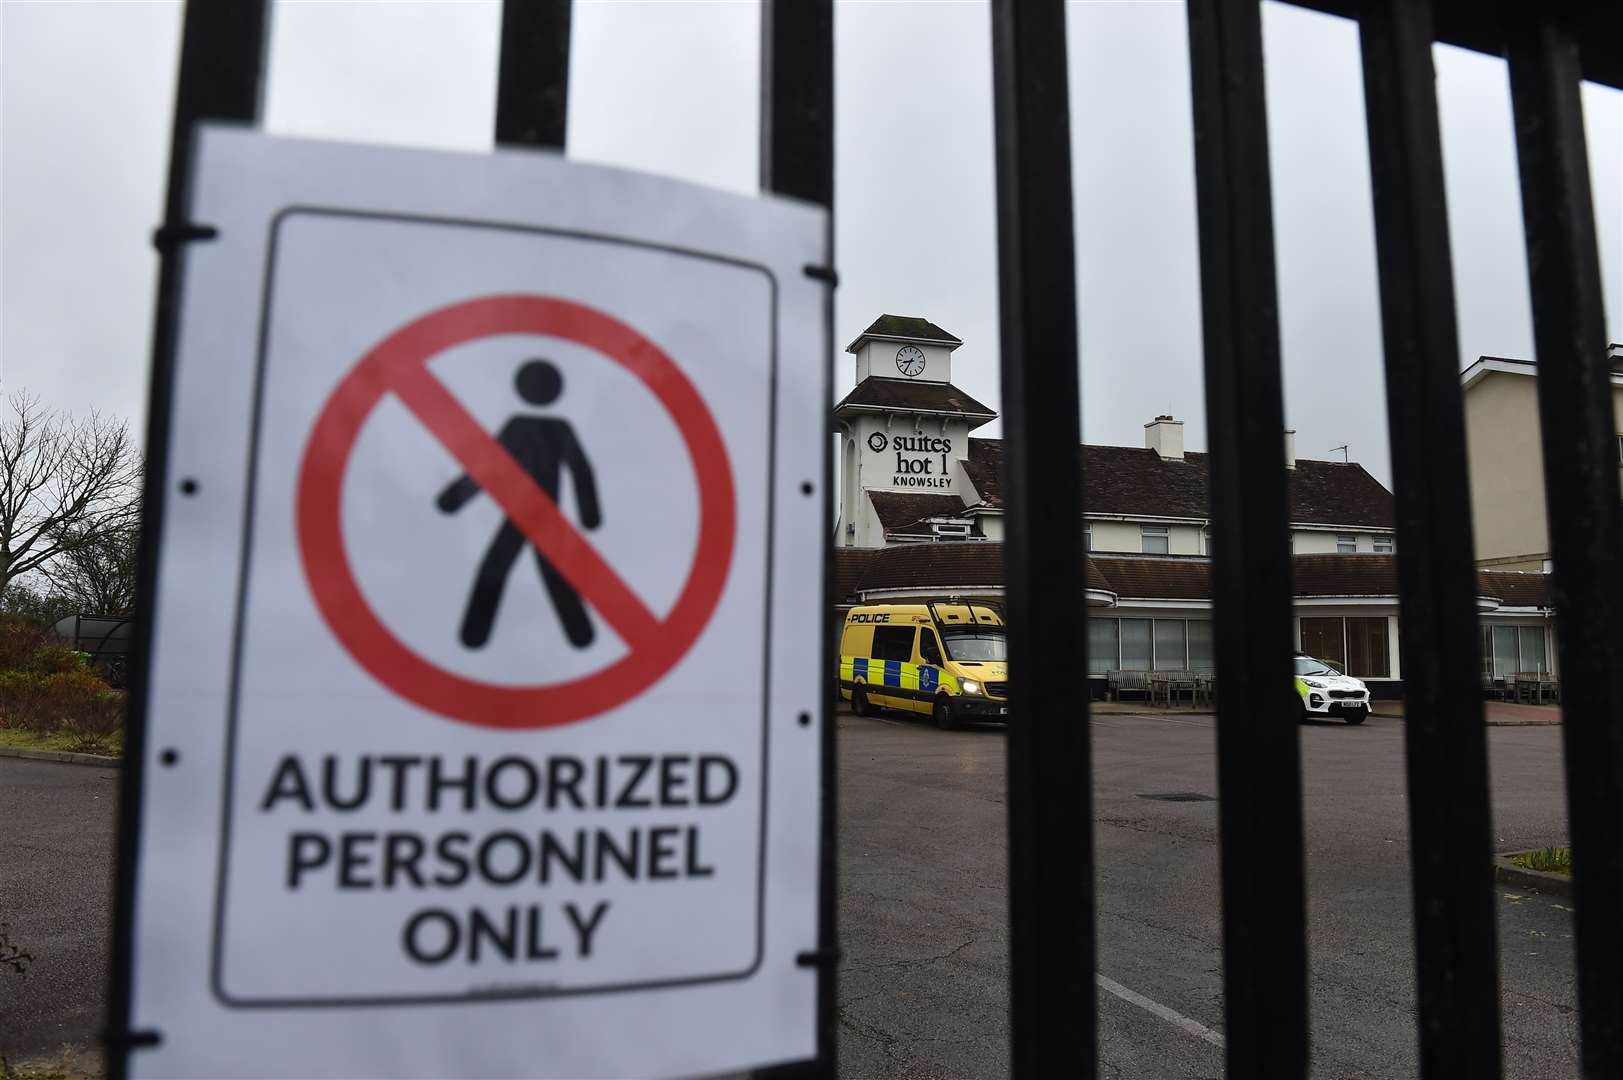 Police outside the Suites Hotel in Knowsley, Merseyside, on Saturday (Peter Powell/PA) 